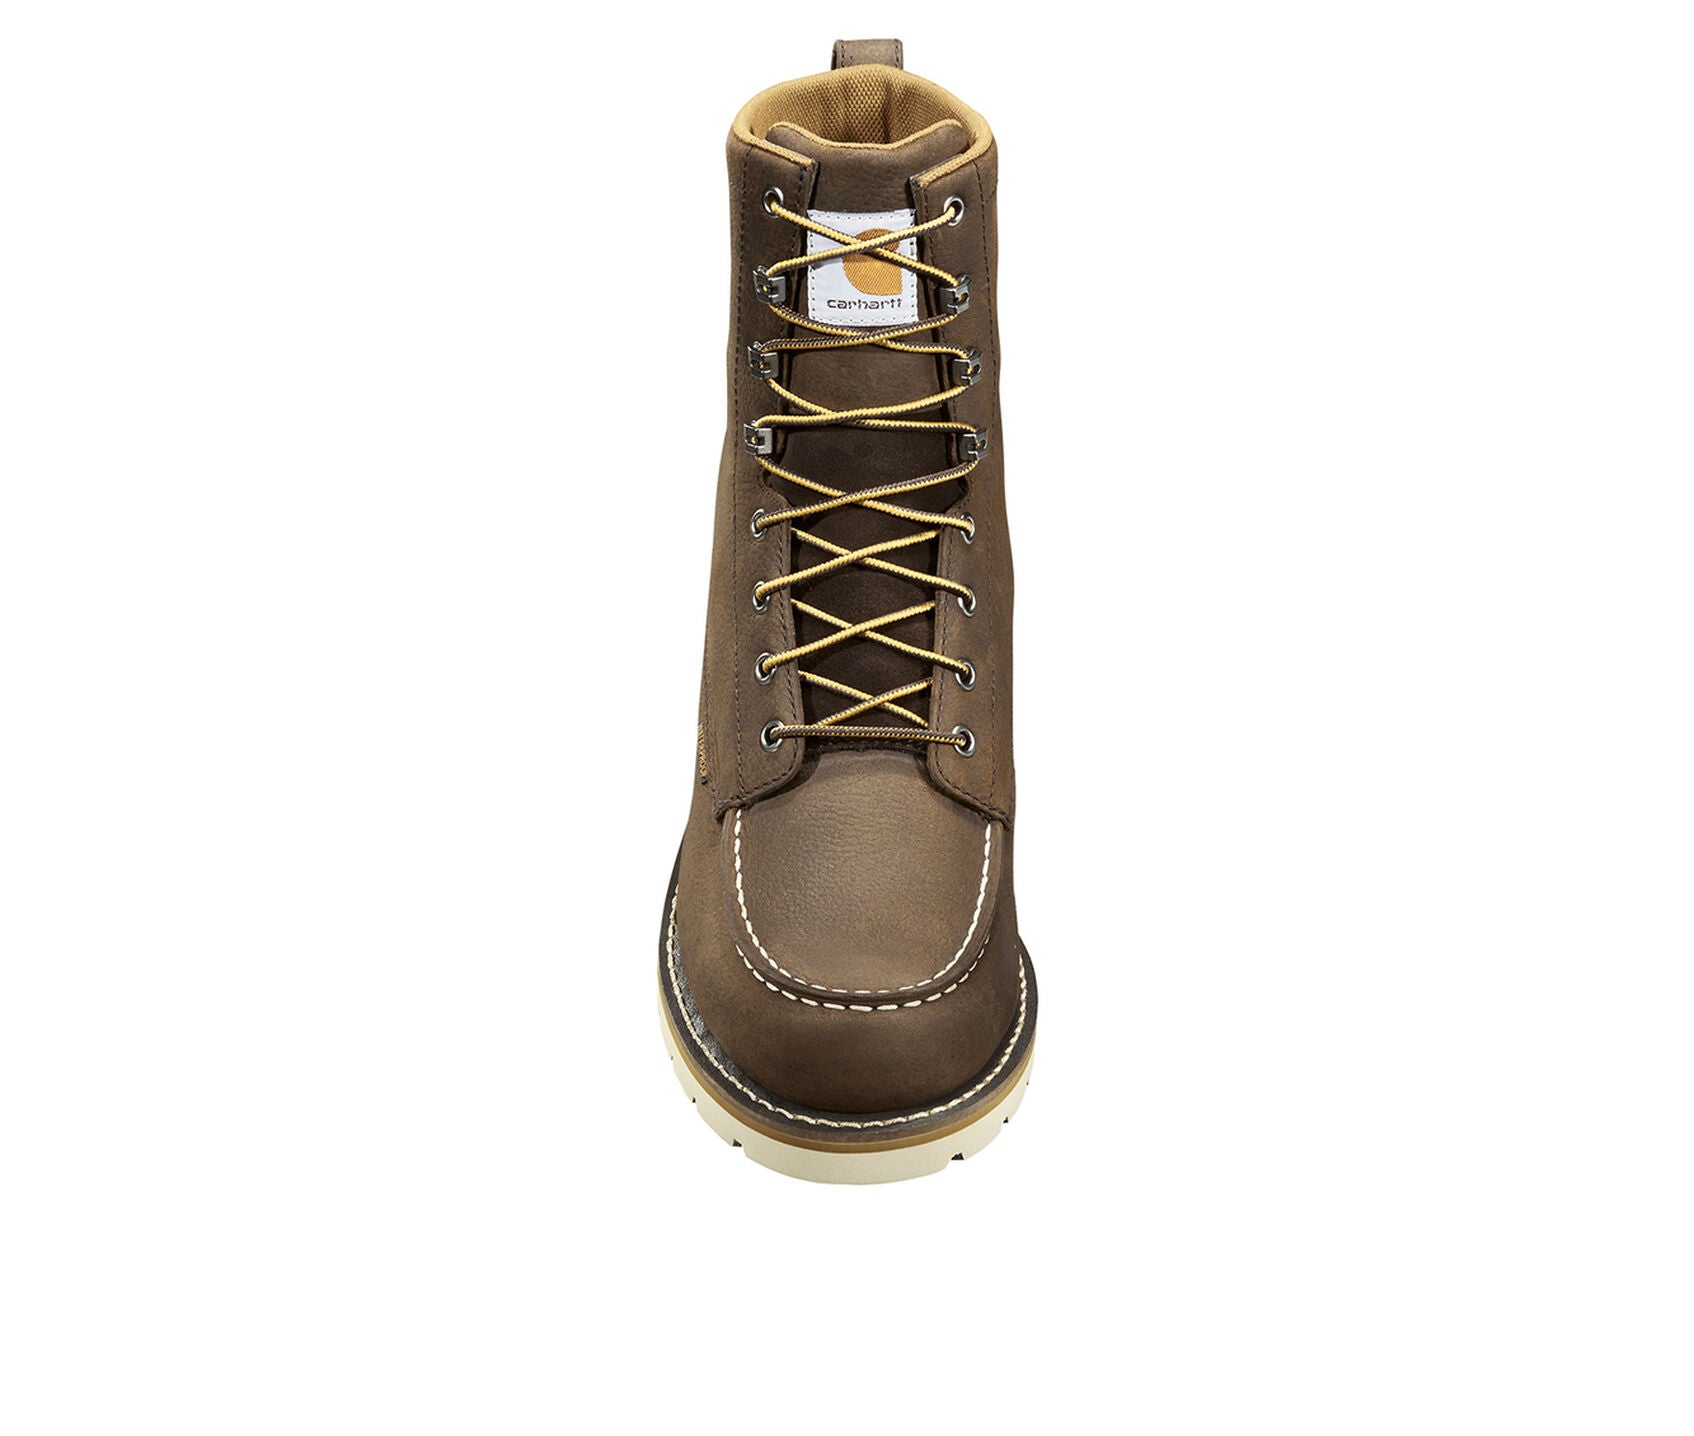 FW8095 Carhartt 8 Inch Moccasin Soft Toe Waterproof Wedge Sole Boot (Brown)